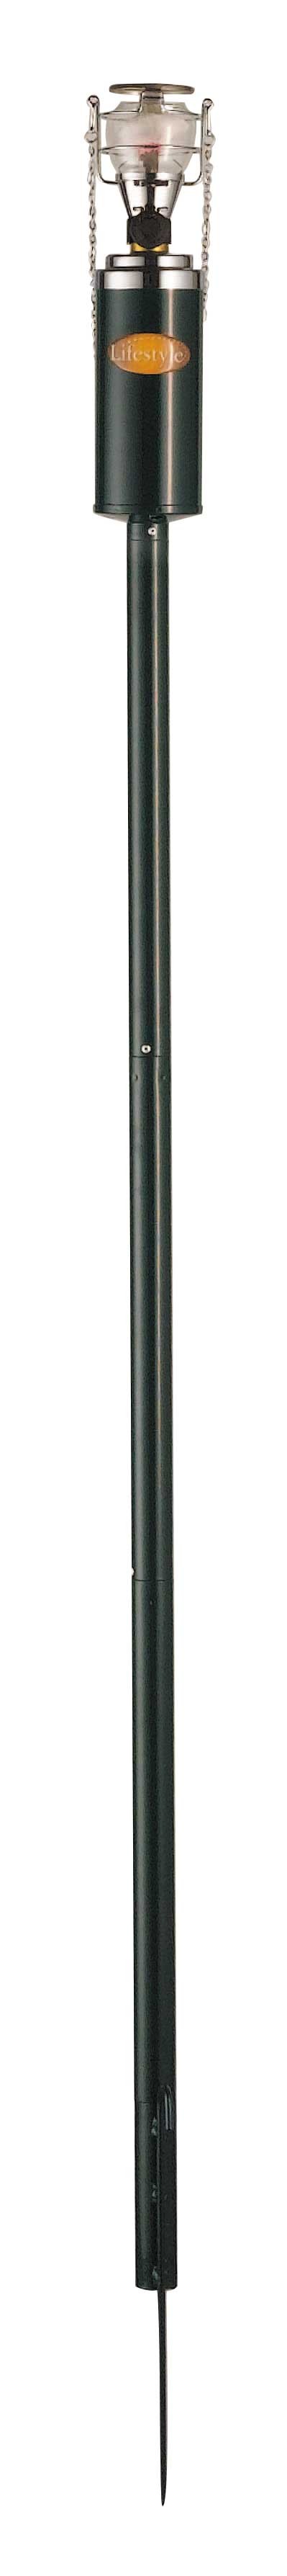 Lifestyle Gas Lantern cw Lawn Spike and Patio Stand